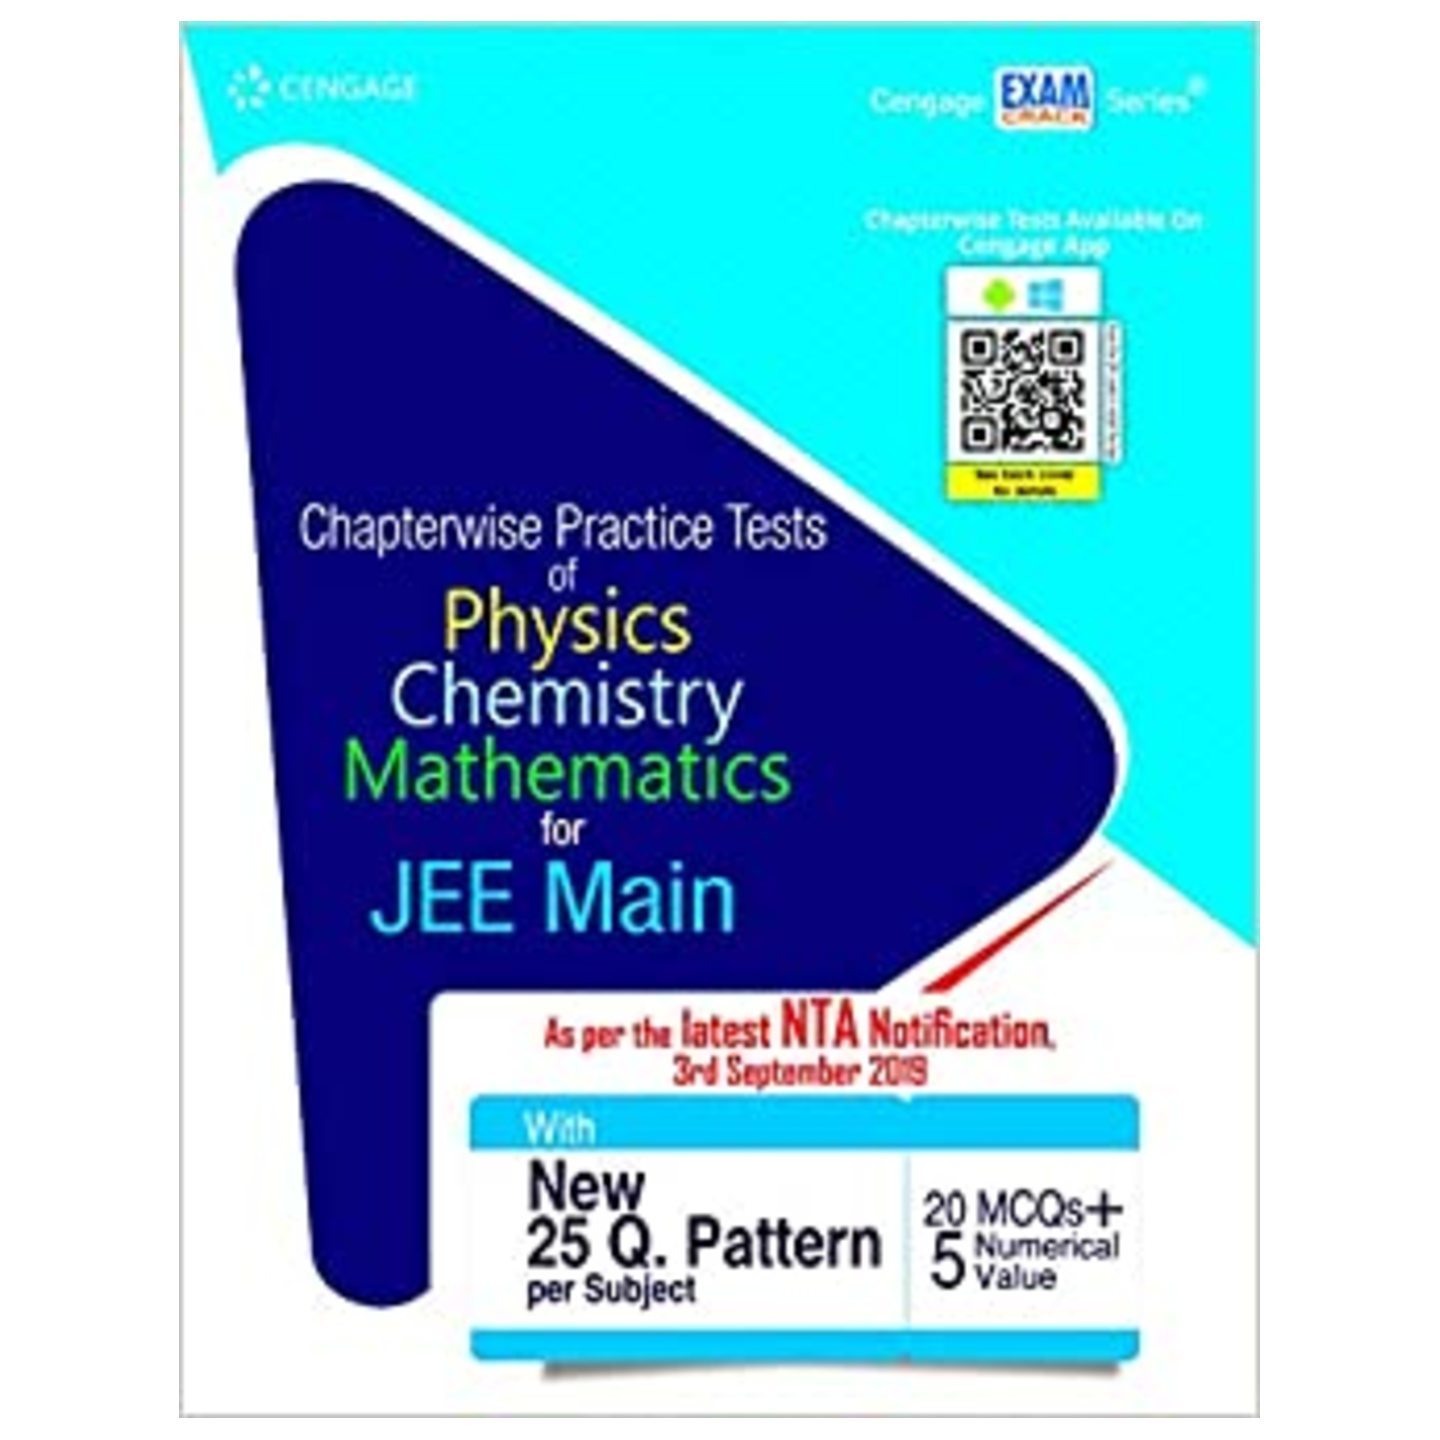 CENGAGE Chapterwise Practice Tests of PCM for JEE Main